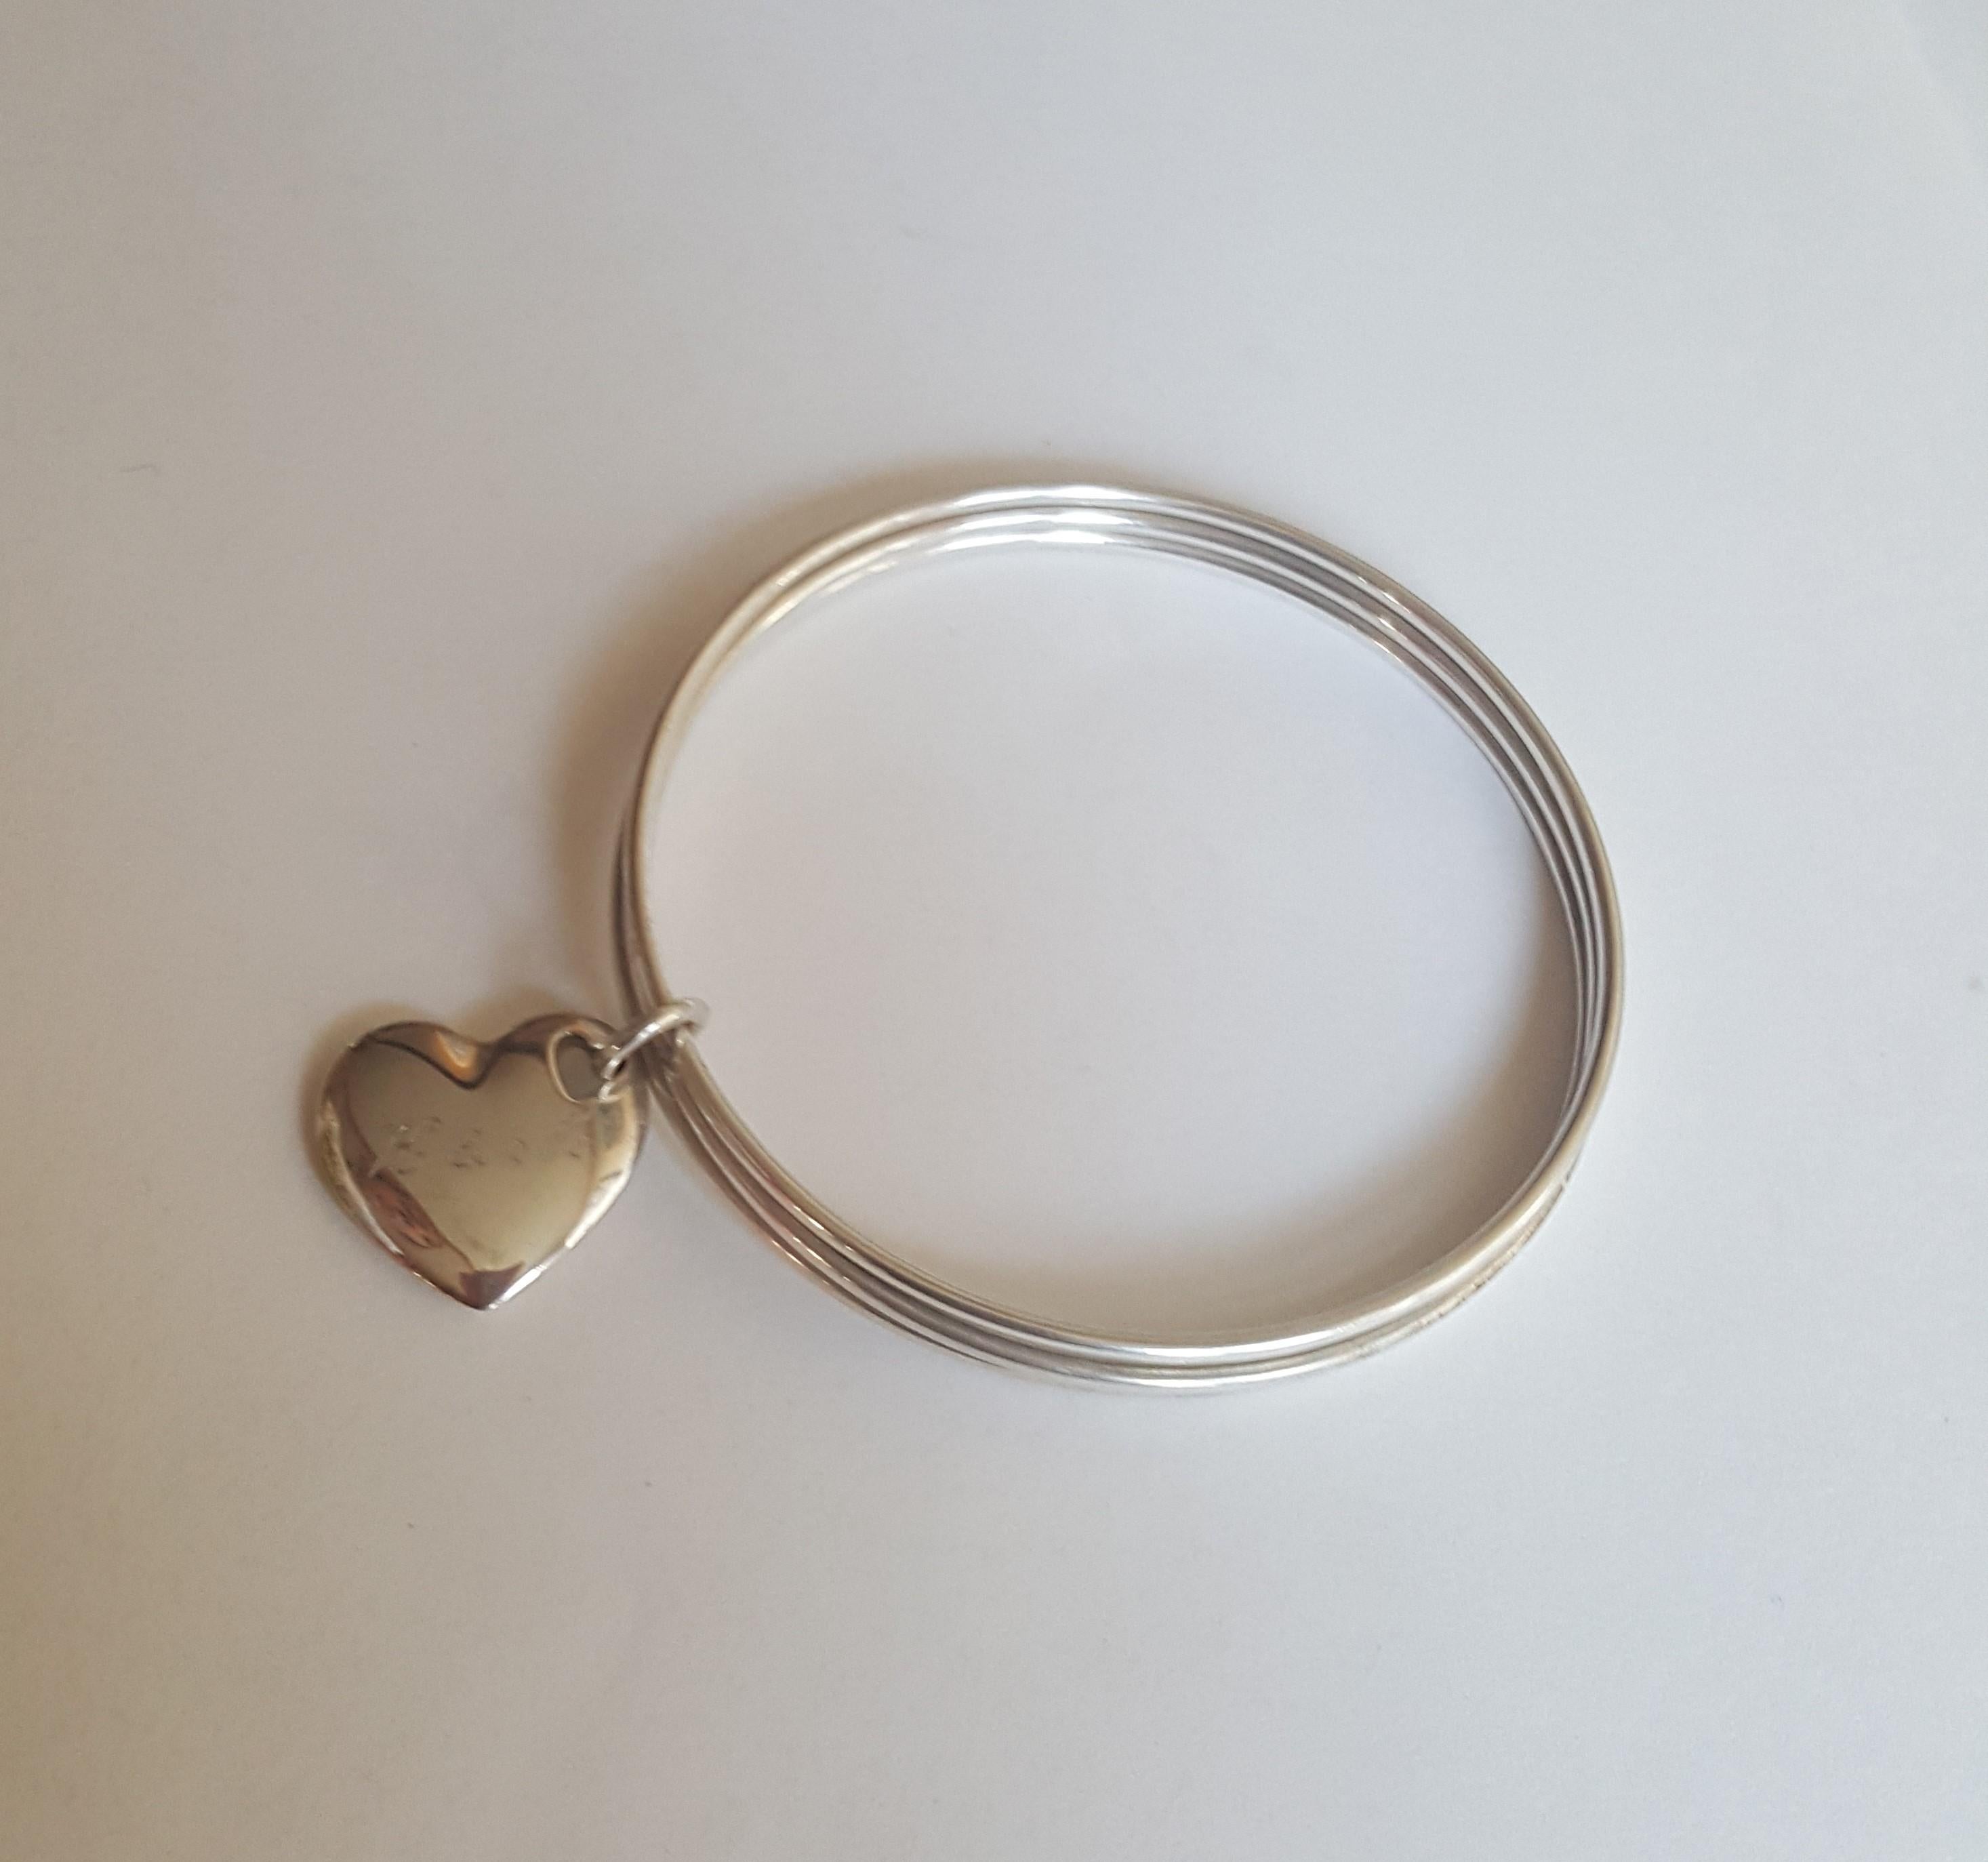 Authentic Tiffany Co Silver Trio Bangles with Tilted Heart Charm. Retired item. Very good condition.
This piece consists of a trio of slim silver bangles, and features a Tilted chunky heart charm. 24.2 grams. Standard Bangle Size. Each bangle is 2mm